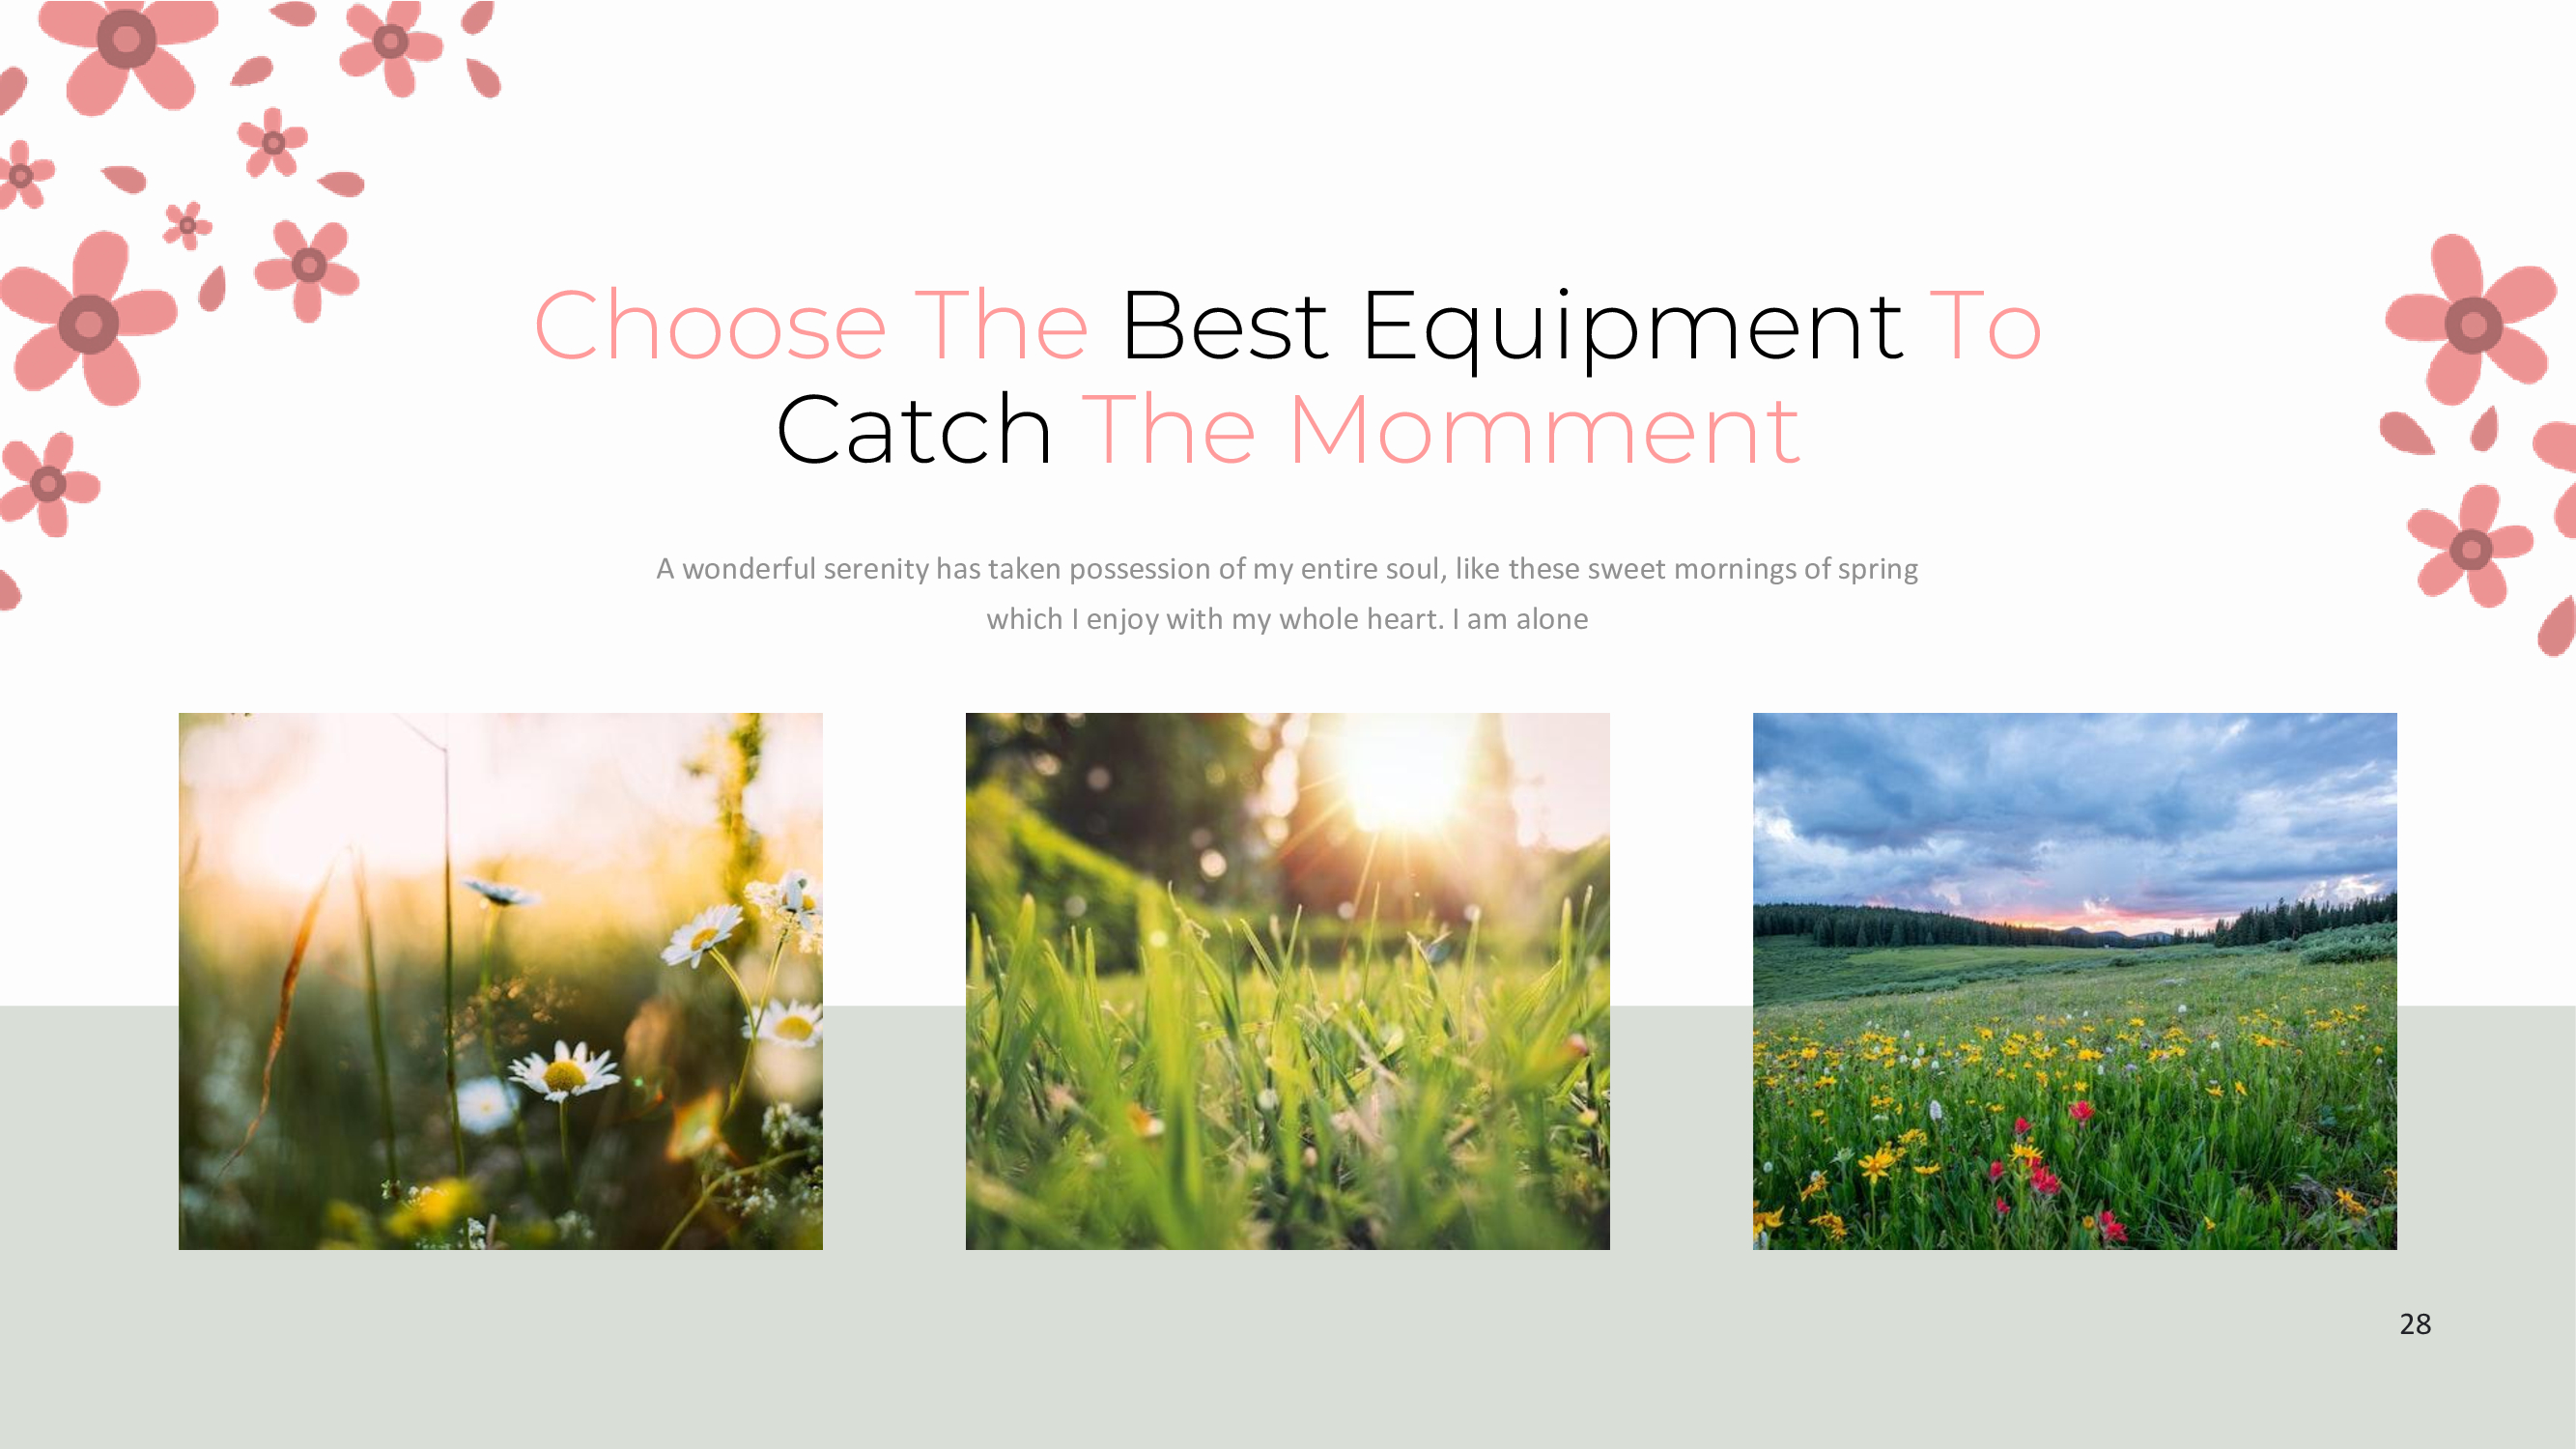 Choose the best equipment to catch the moments.